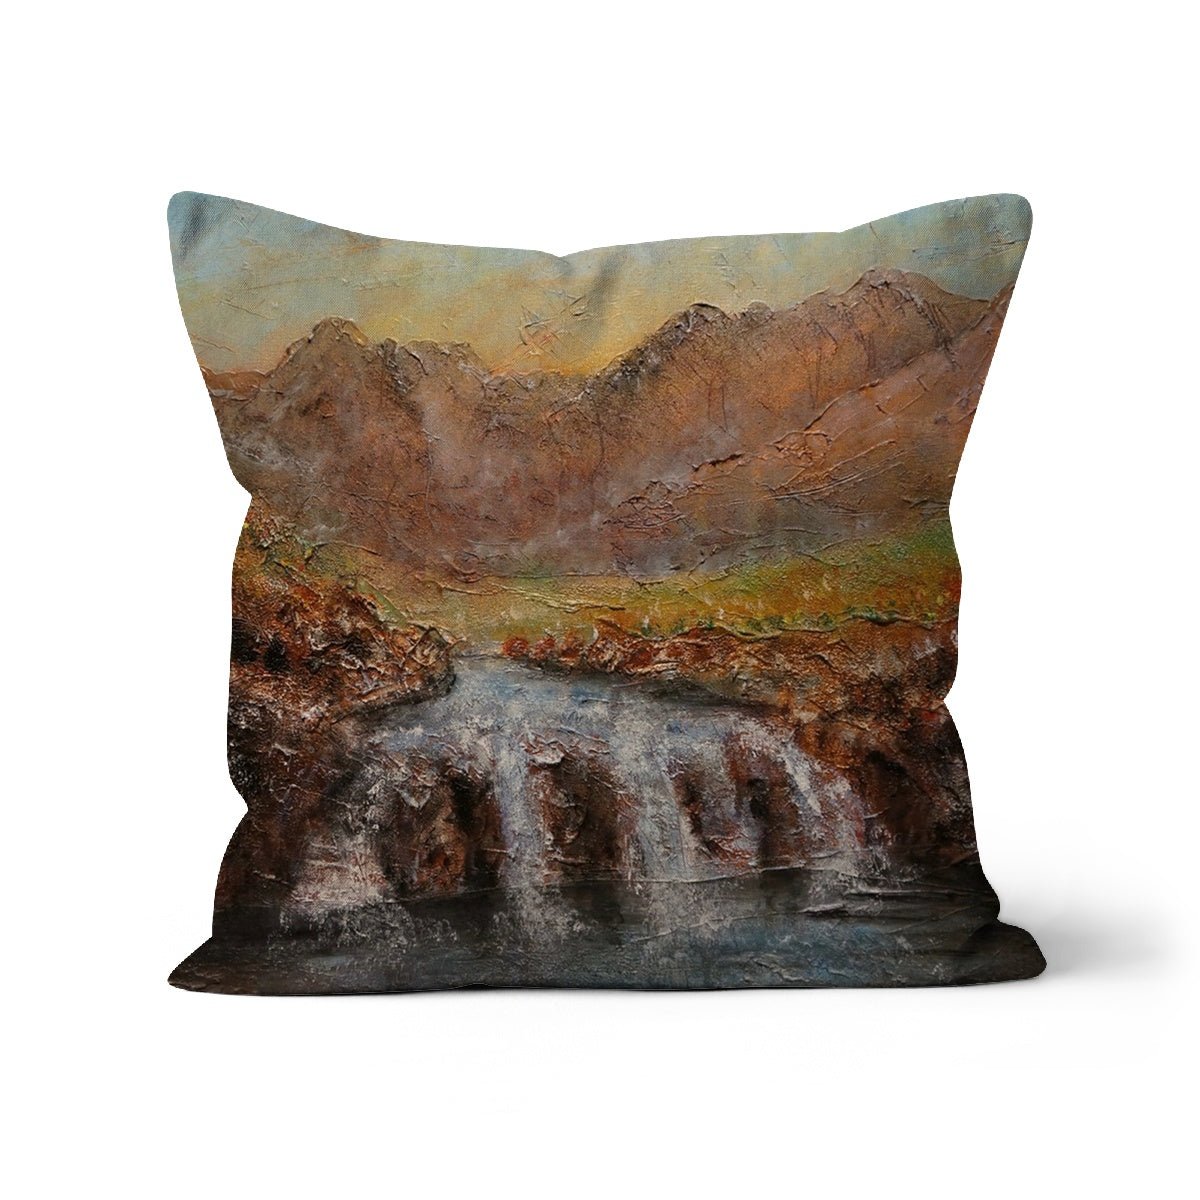 Fairy Pools Dawn Skye Art Gifts Cushion-Cushions-Skye Art Gallery-Linen-16"x16"-Paintings, Prints, Homeware, Art Gifts From Scotland By Scottish Artist Kevin Hunter